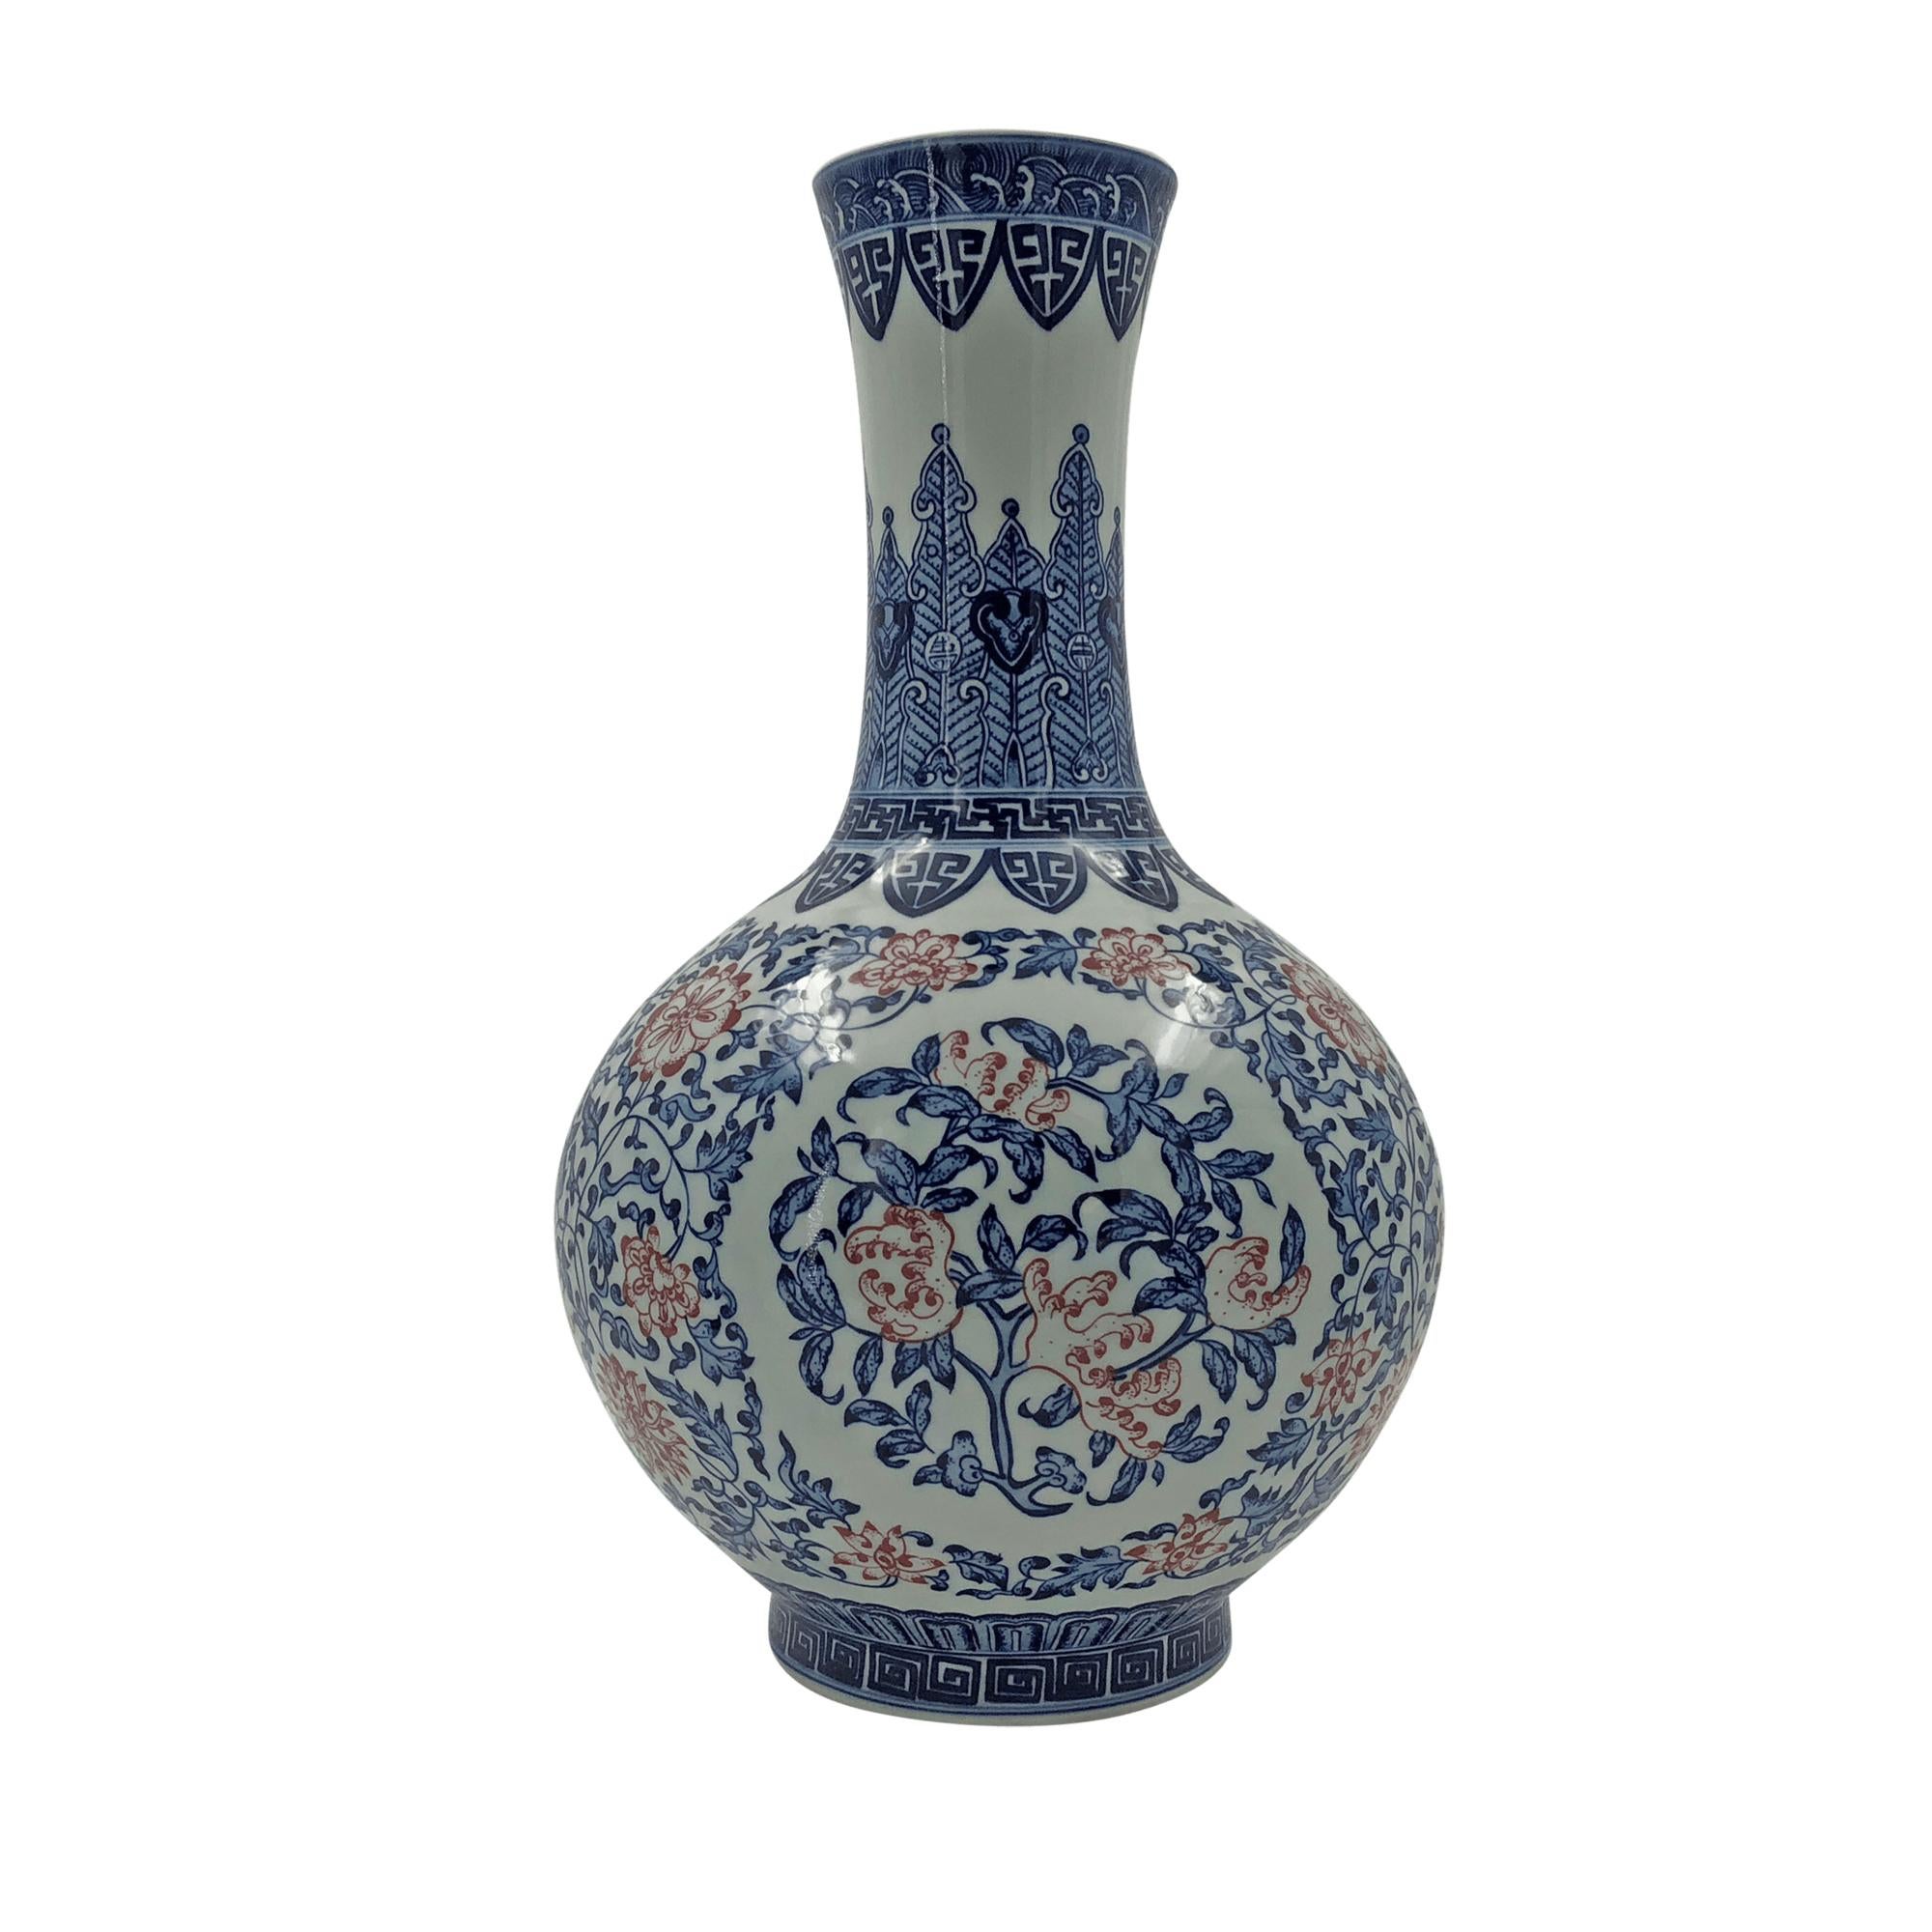 A pair of large Chinese export iron red, blue and white tall bottle vase with panels of floral bouquets.